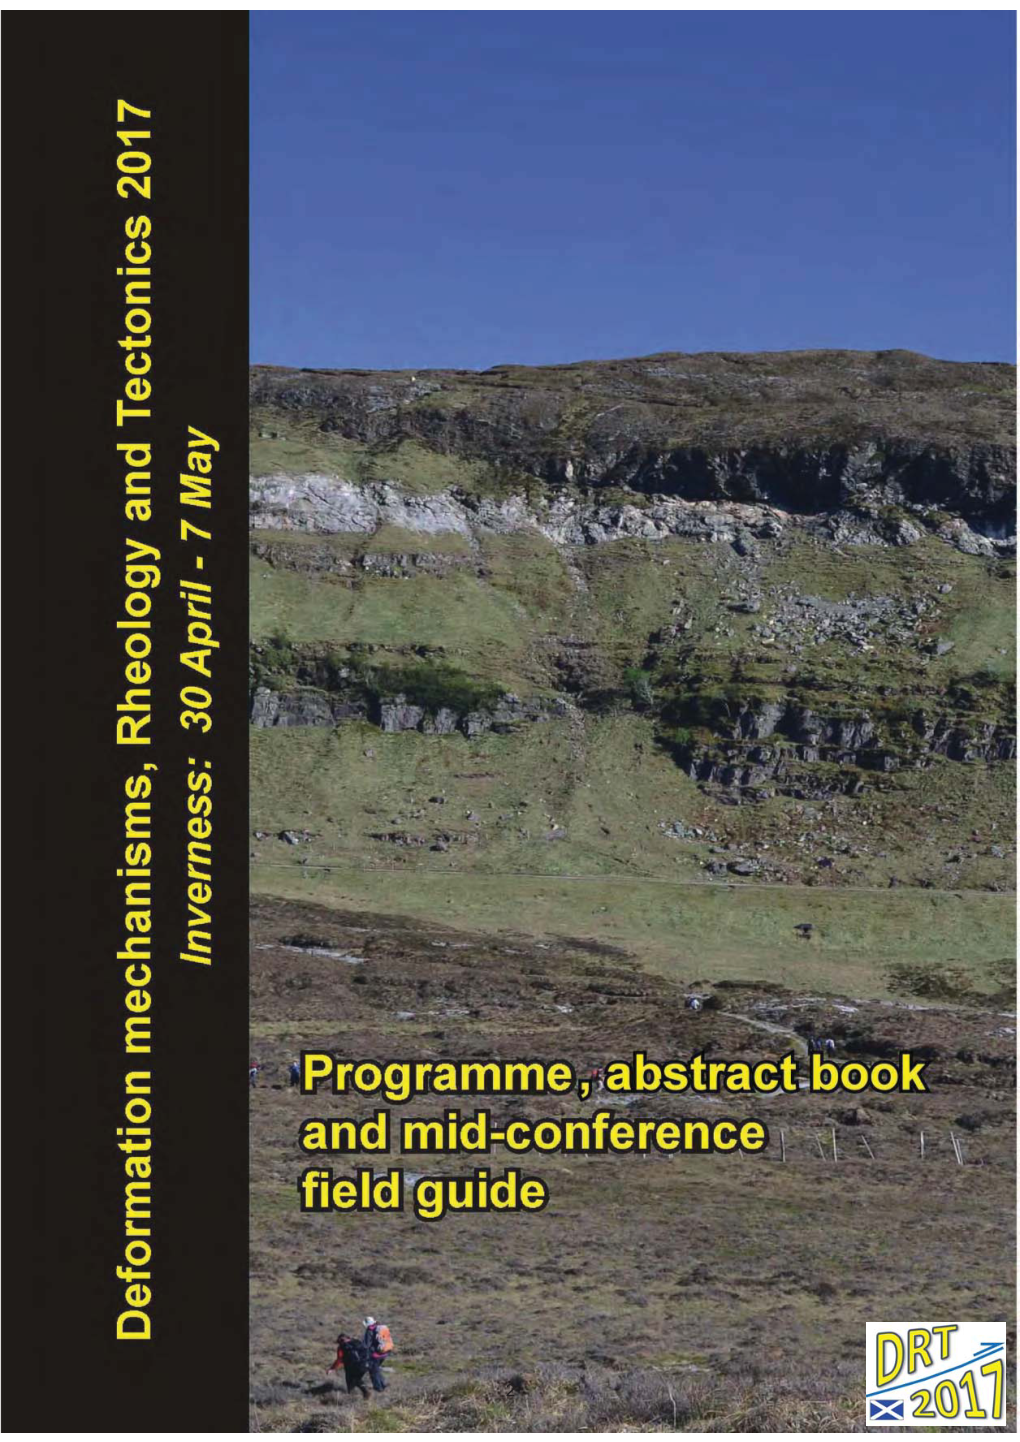 Conference Programme, Abstract Book and Mid-Conference Field Guide